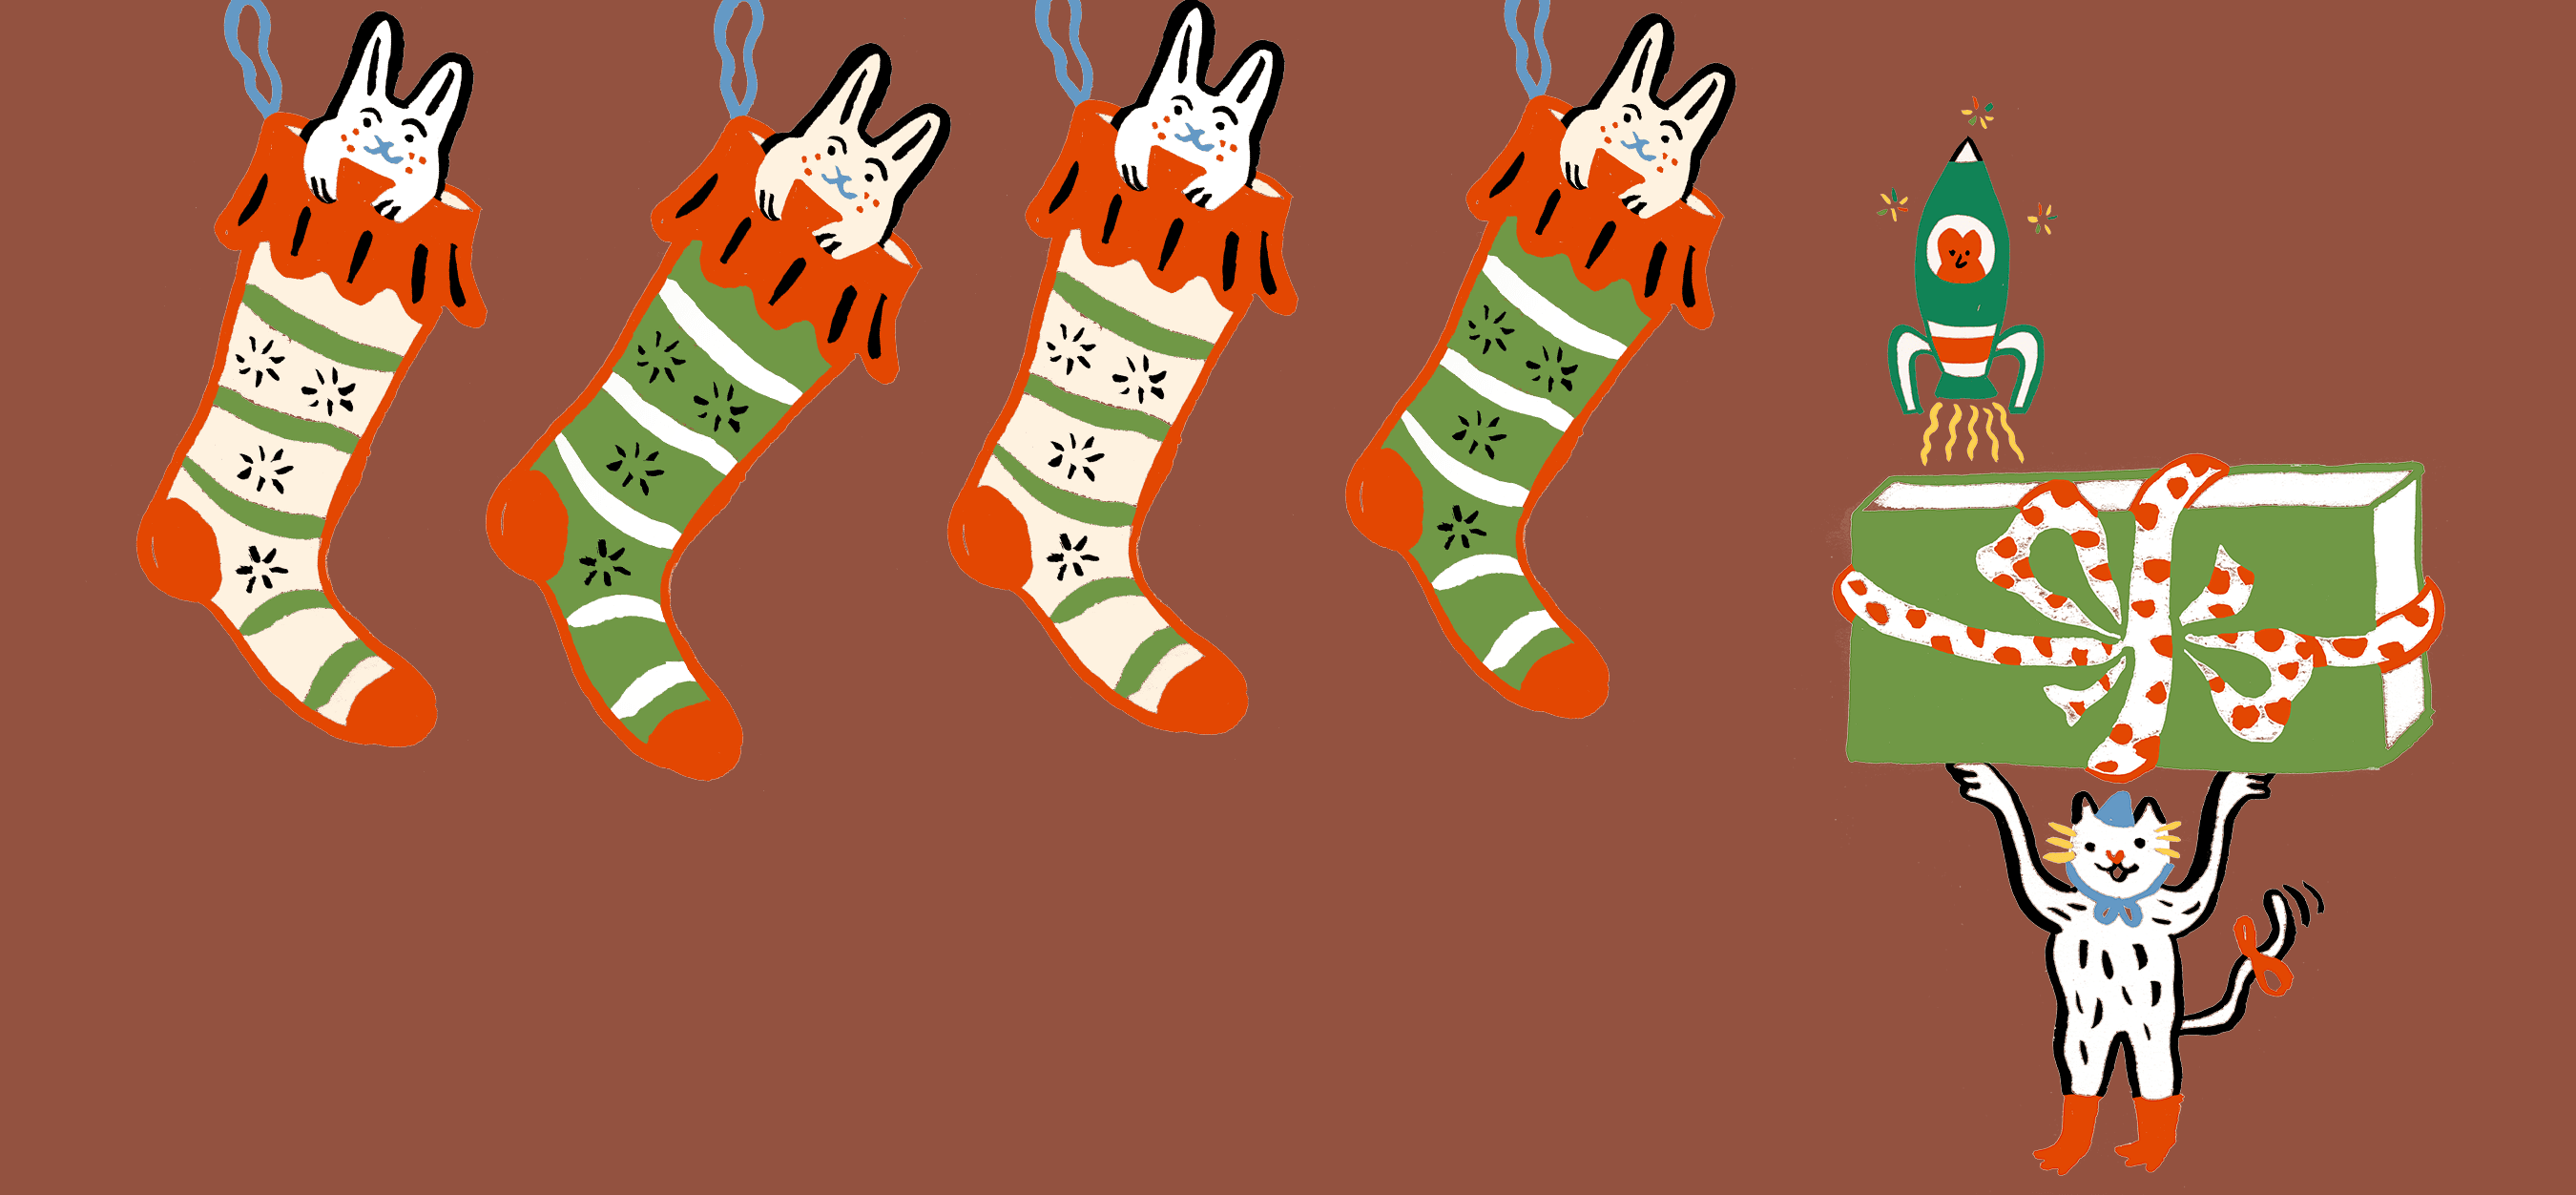 illustration of several cats in Christmas stockings and carrying fun stocking stuffers